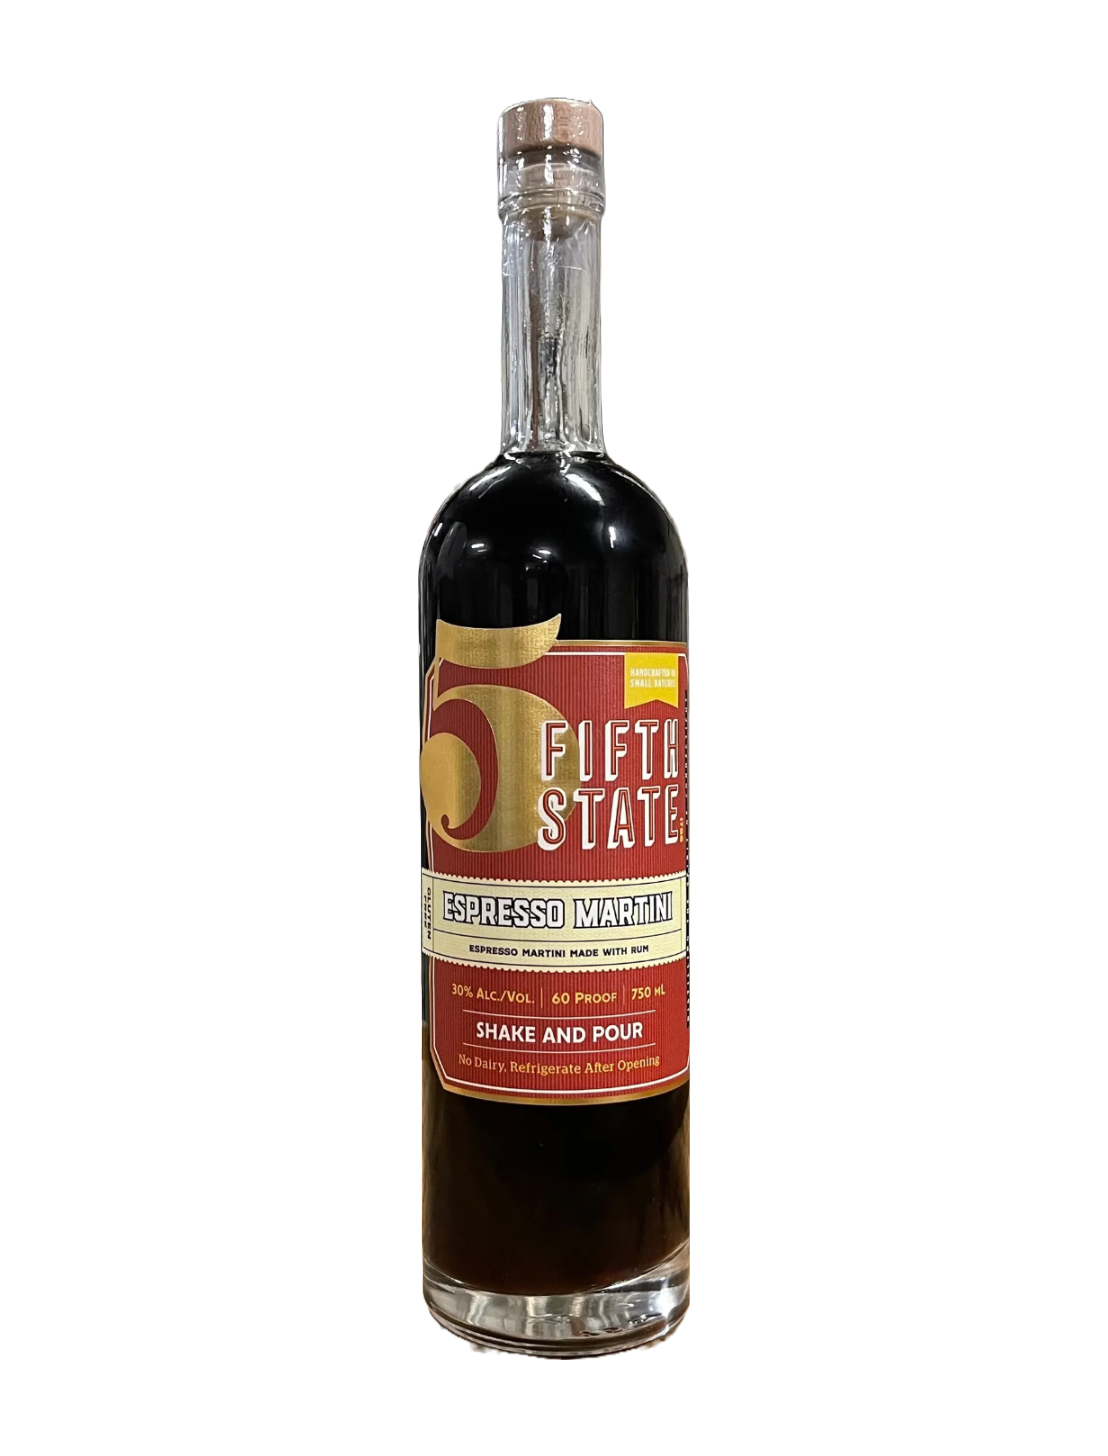 A bottle of Fifth State Distillery Espresso Martini in front of a plain white background